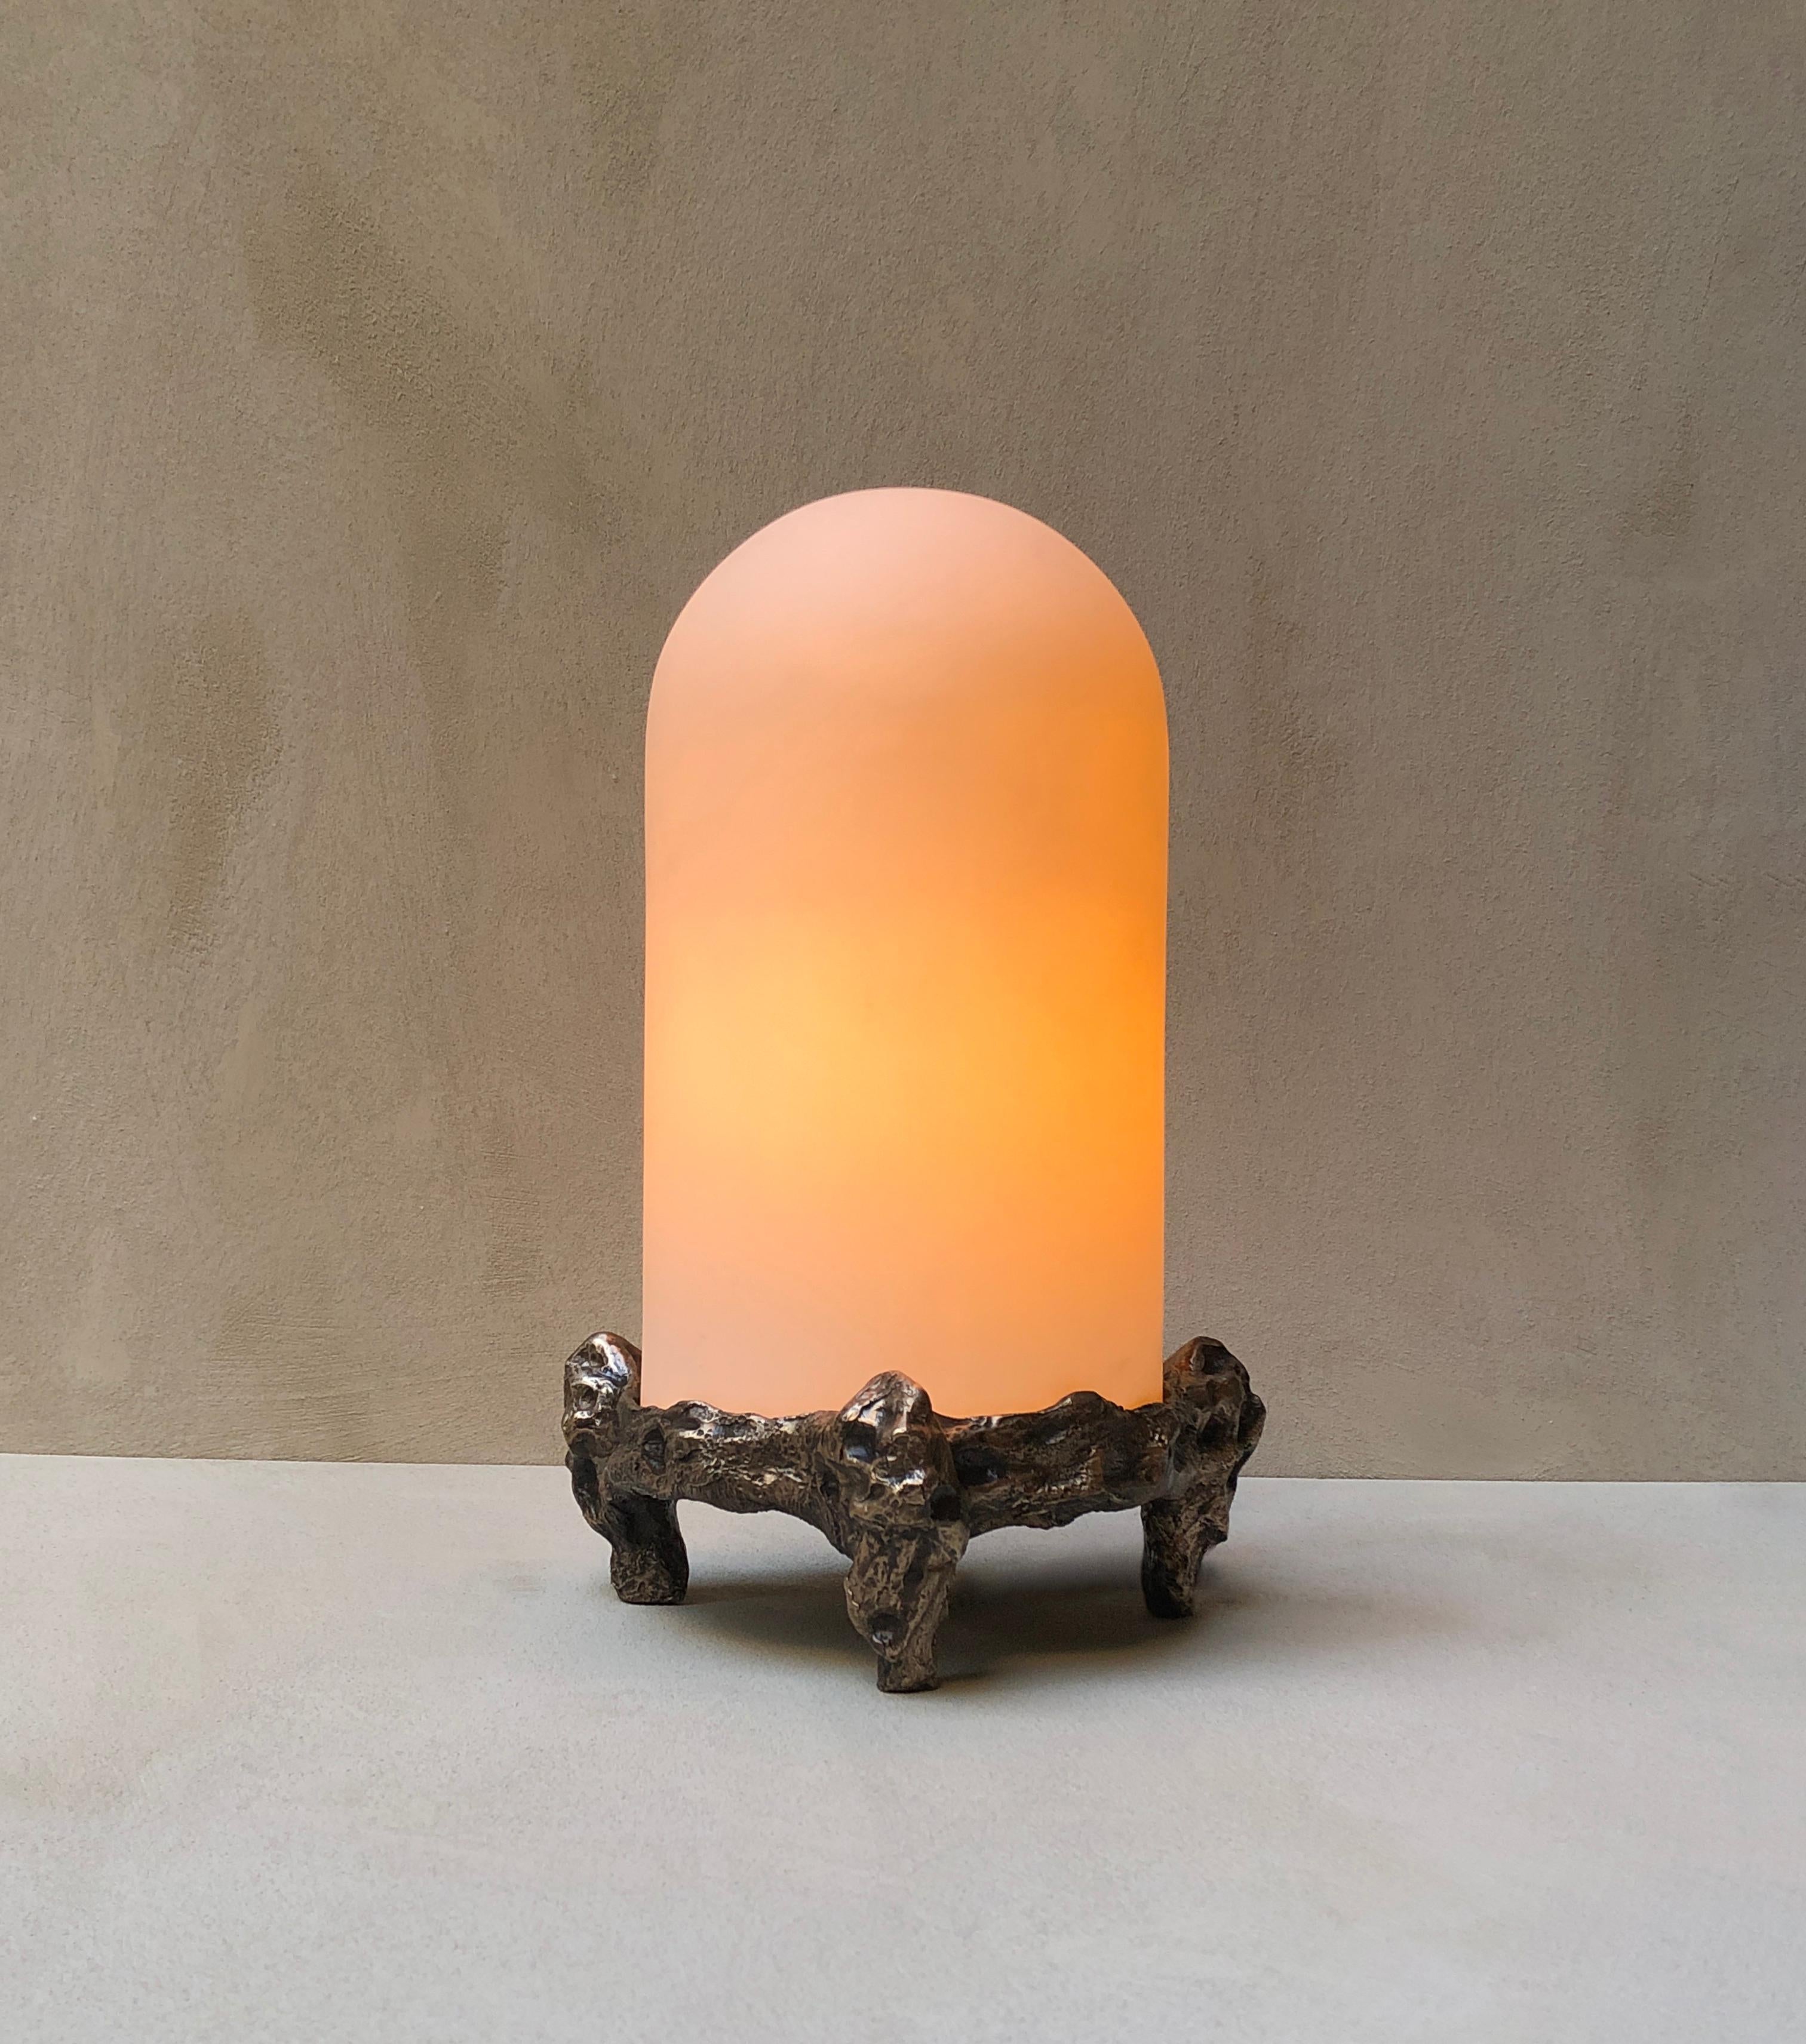 Nova table lamp by William Guillon
Dimensions: H 34 x D 24 cm
Materials: Caste bronze, porcelain.

William Guillon

William Guillon’s main influences are strong artistic movements, often dark and filled with modern melancholy. Obsessed with a